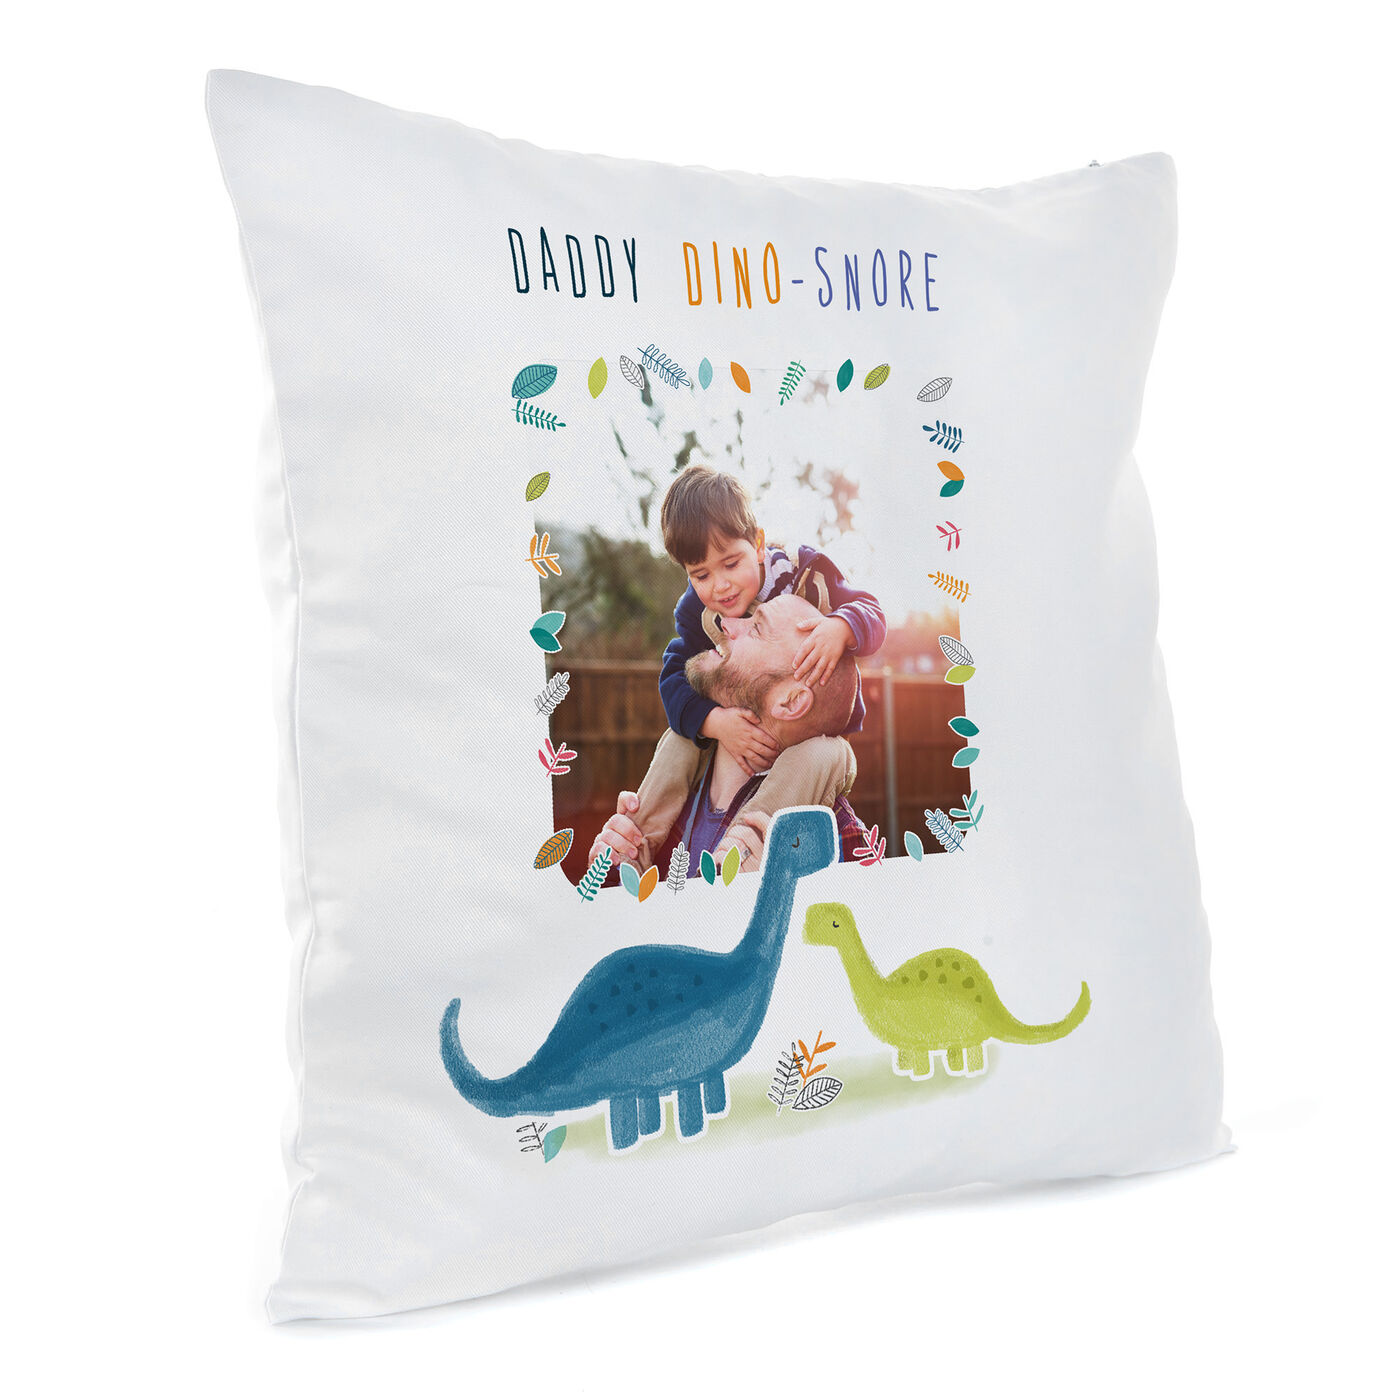 Daddy　Father's　Day　Personalised　for　UK　Cushion　Factory　Dino-Snore　Card　GBP　17.99　Buy　Photo